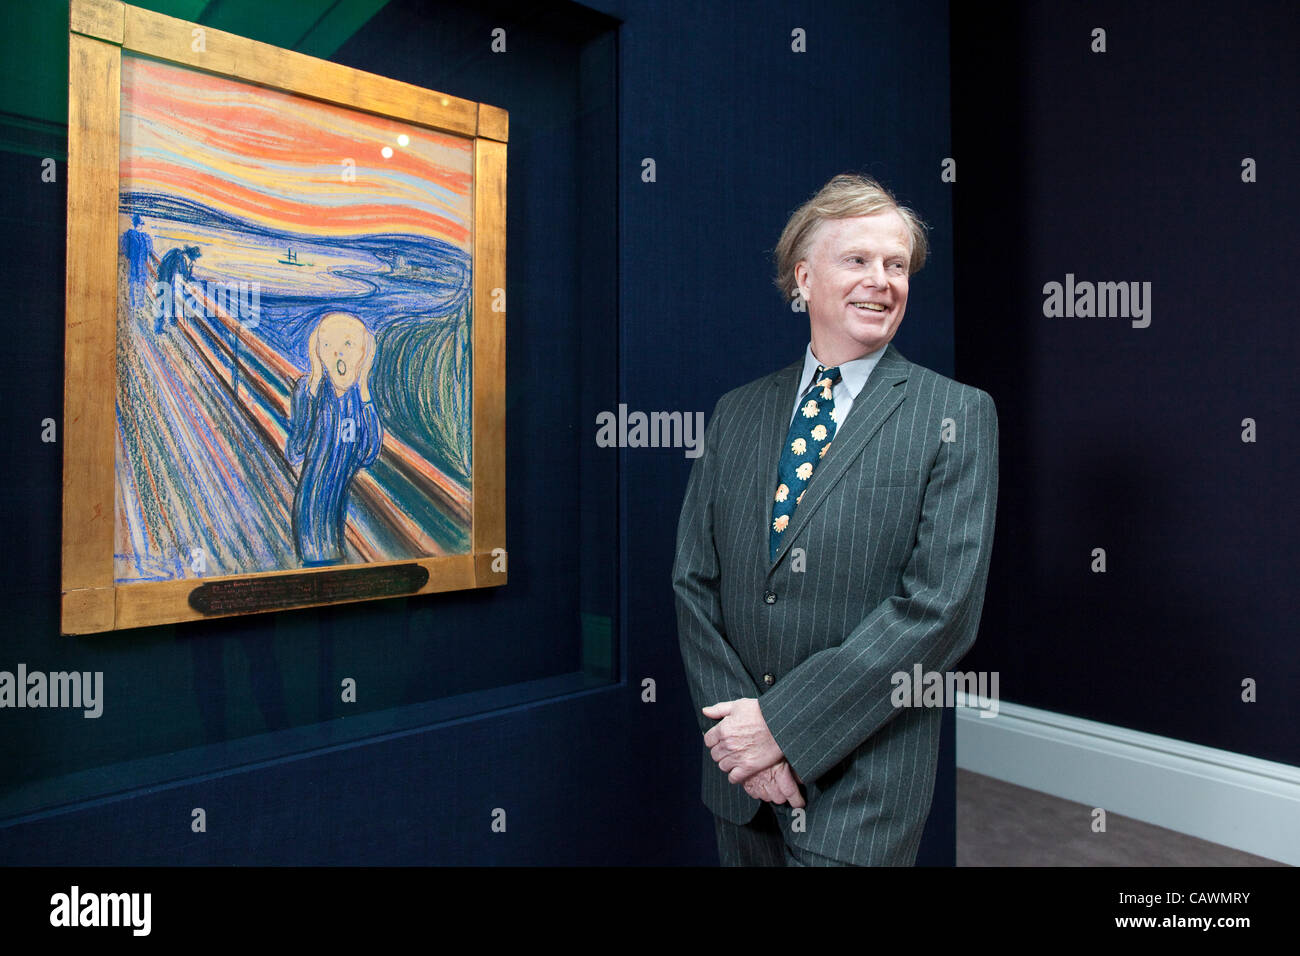 Sotheby's, Mayfair, London, UK.21.04.2012 Picture shows Petter Olsen, Norwegian owner of Edvard Munch's 'The Scream' painting at Sotheby's London, this version dating from 1895, the only to remain in private hands to be sold  at auction in New York on 2nd May 2012, expected to reach £50M. Stock Photo